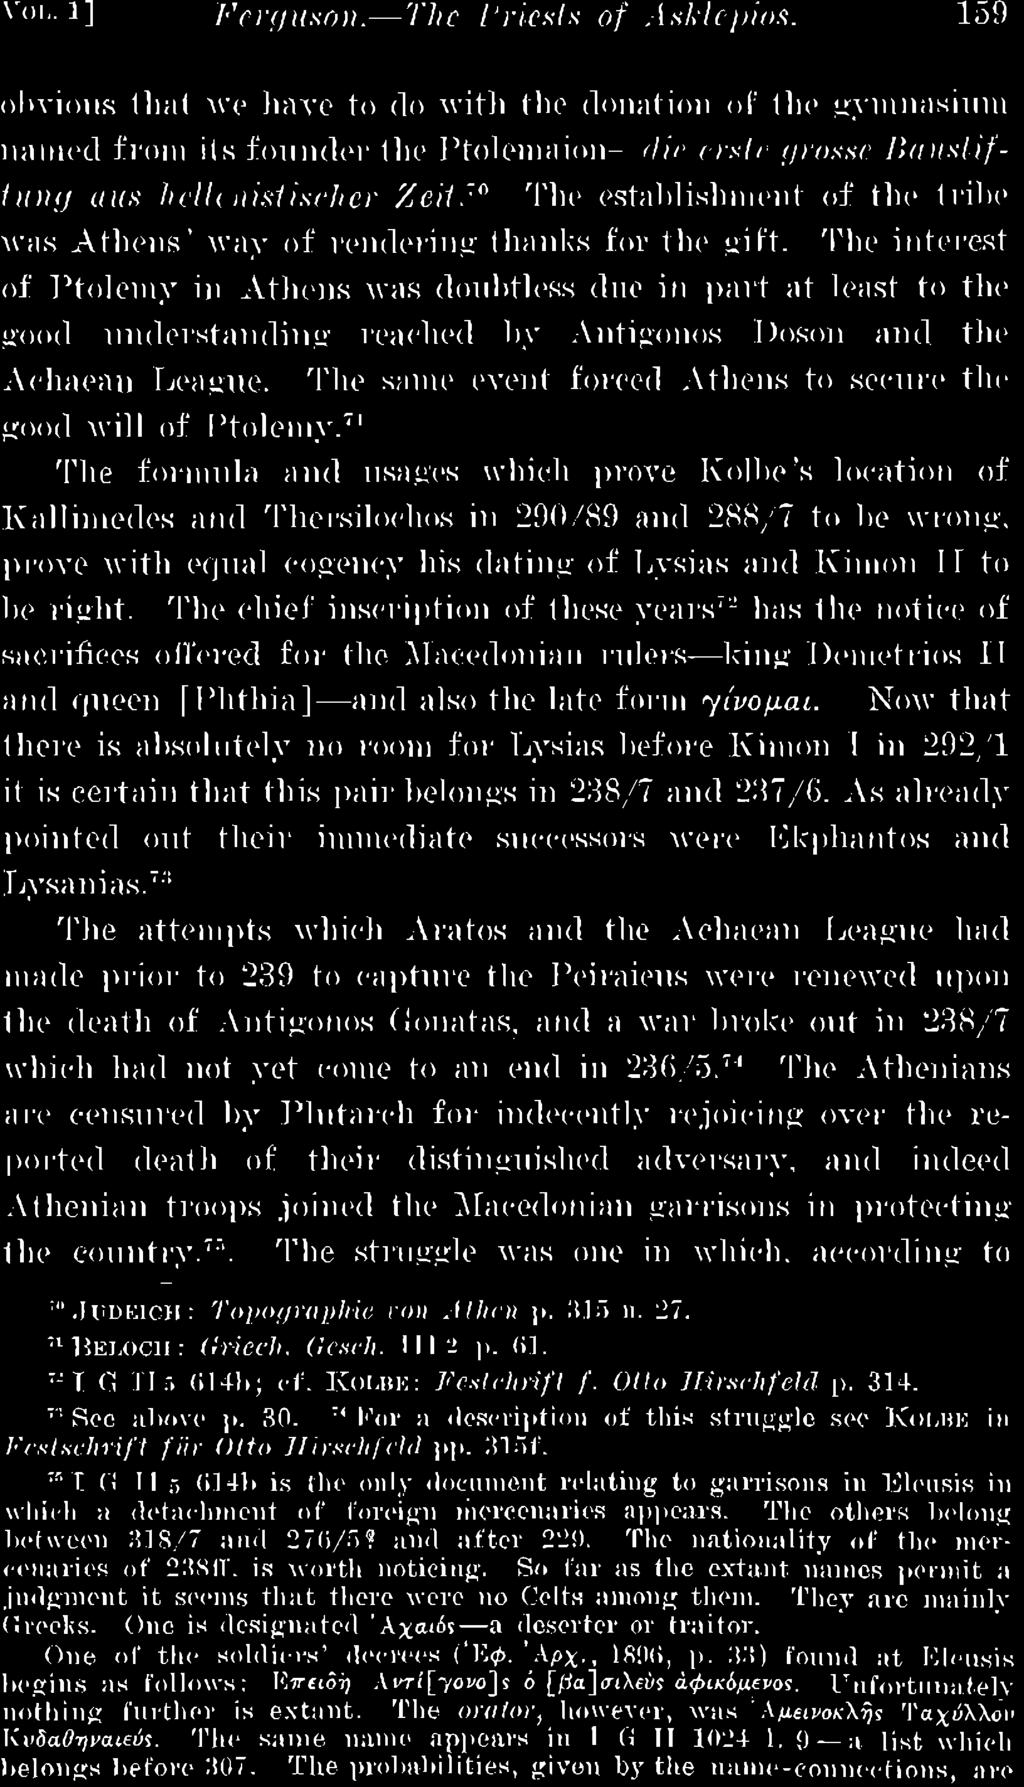 As already pointed out their immediate successors were Ekphantos and Lysanias.